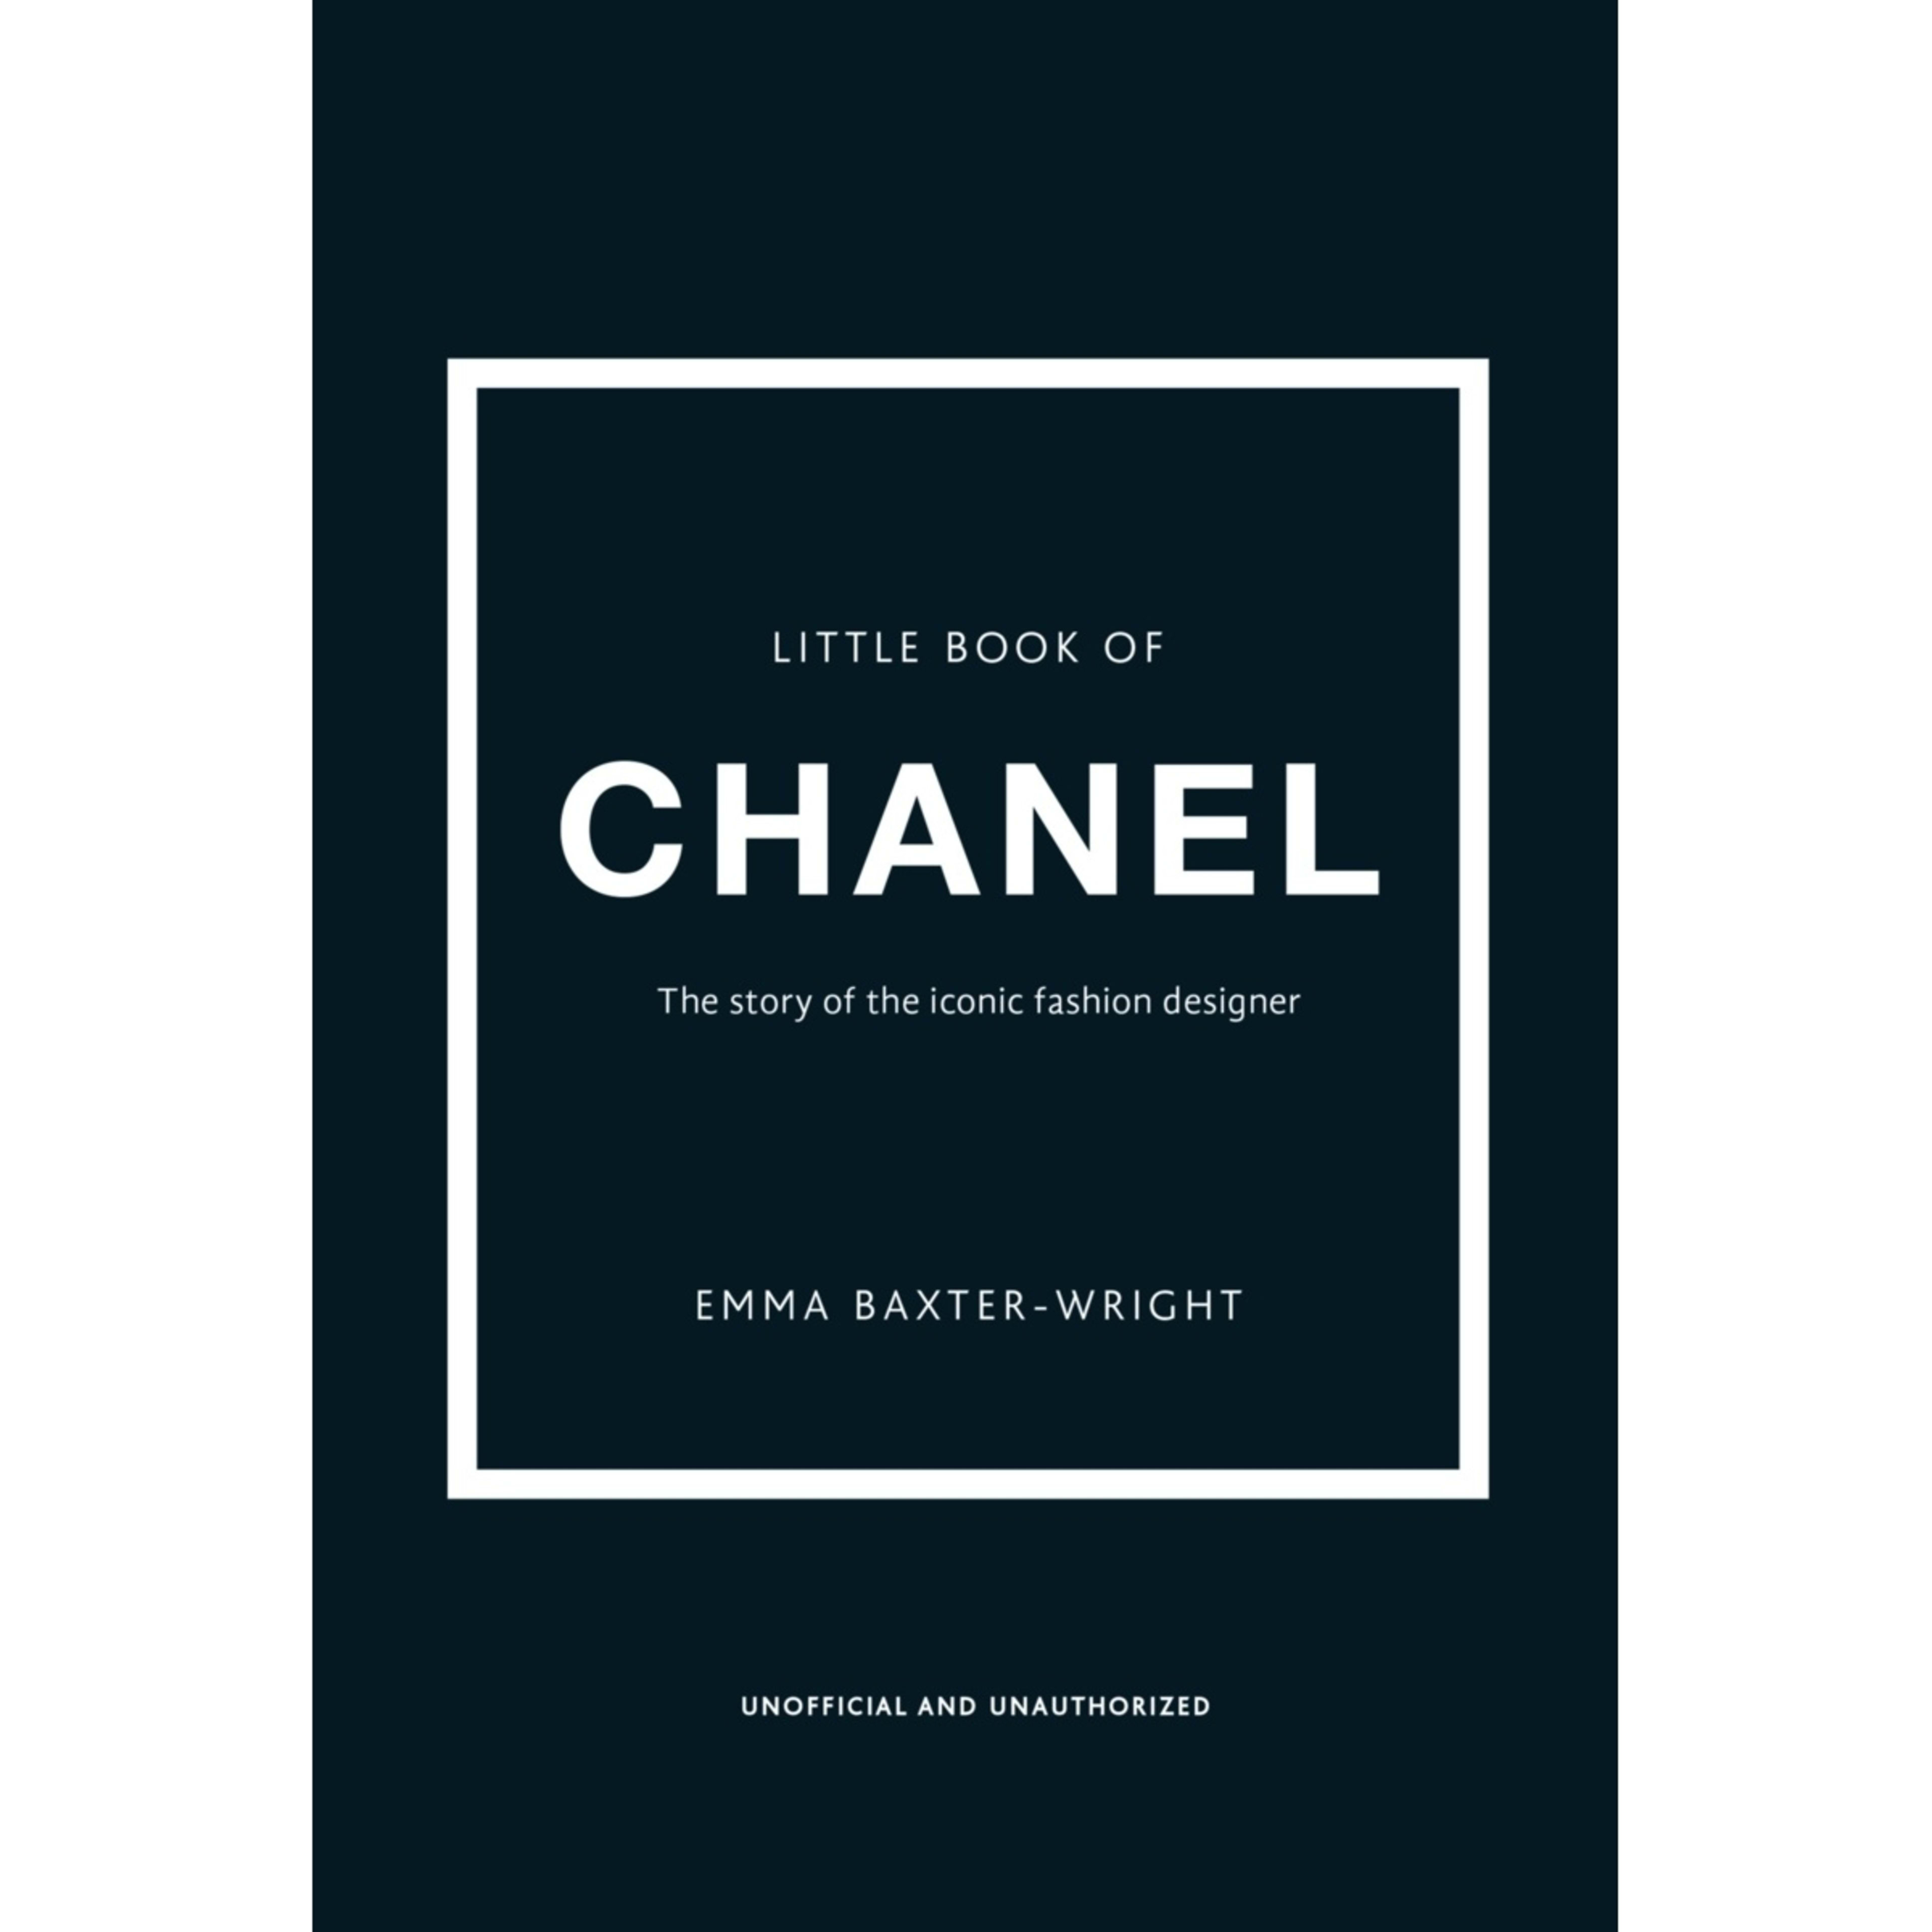 Little Book of Chanel by Emma Baxter-Wright - Book